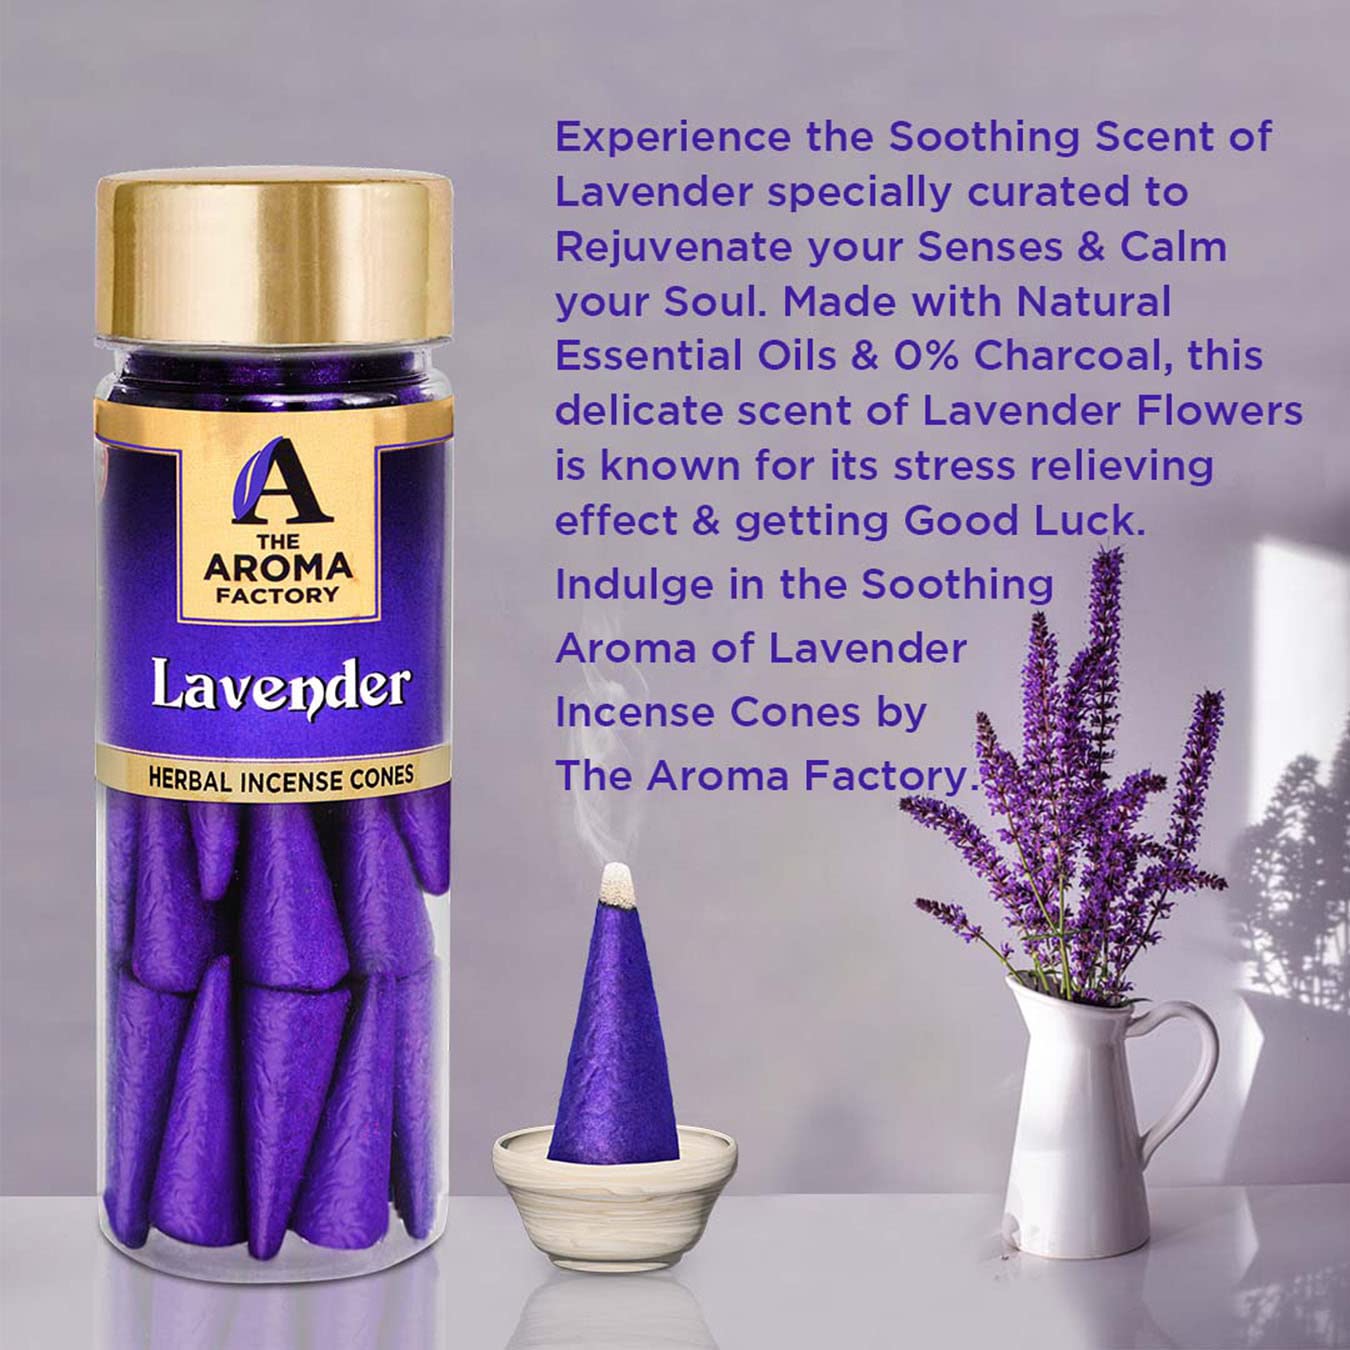 The Aroma Factory Incense Dhoop Cone for Pooja, Lavender (100% Herbal & 0% Charcoal) 2 Bottles x 30 Cones